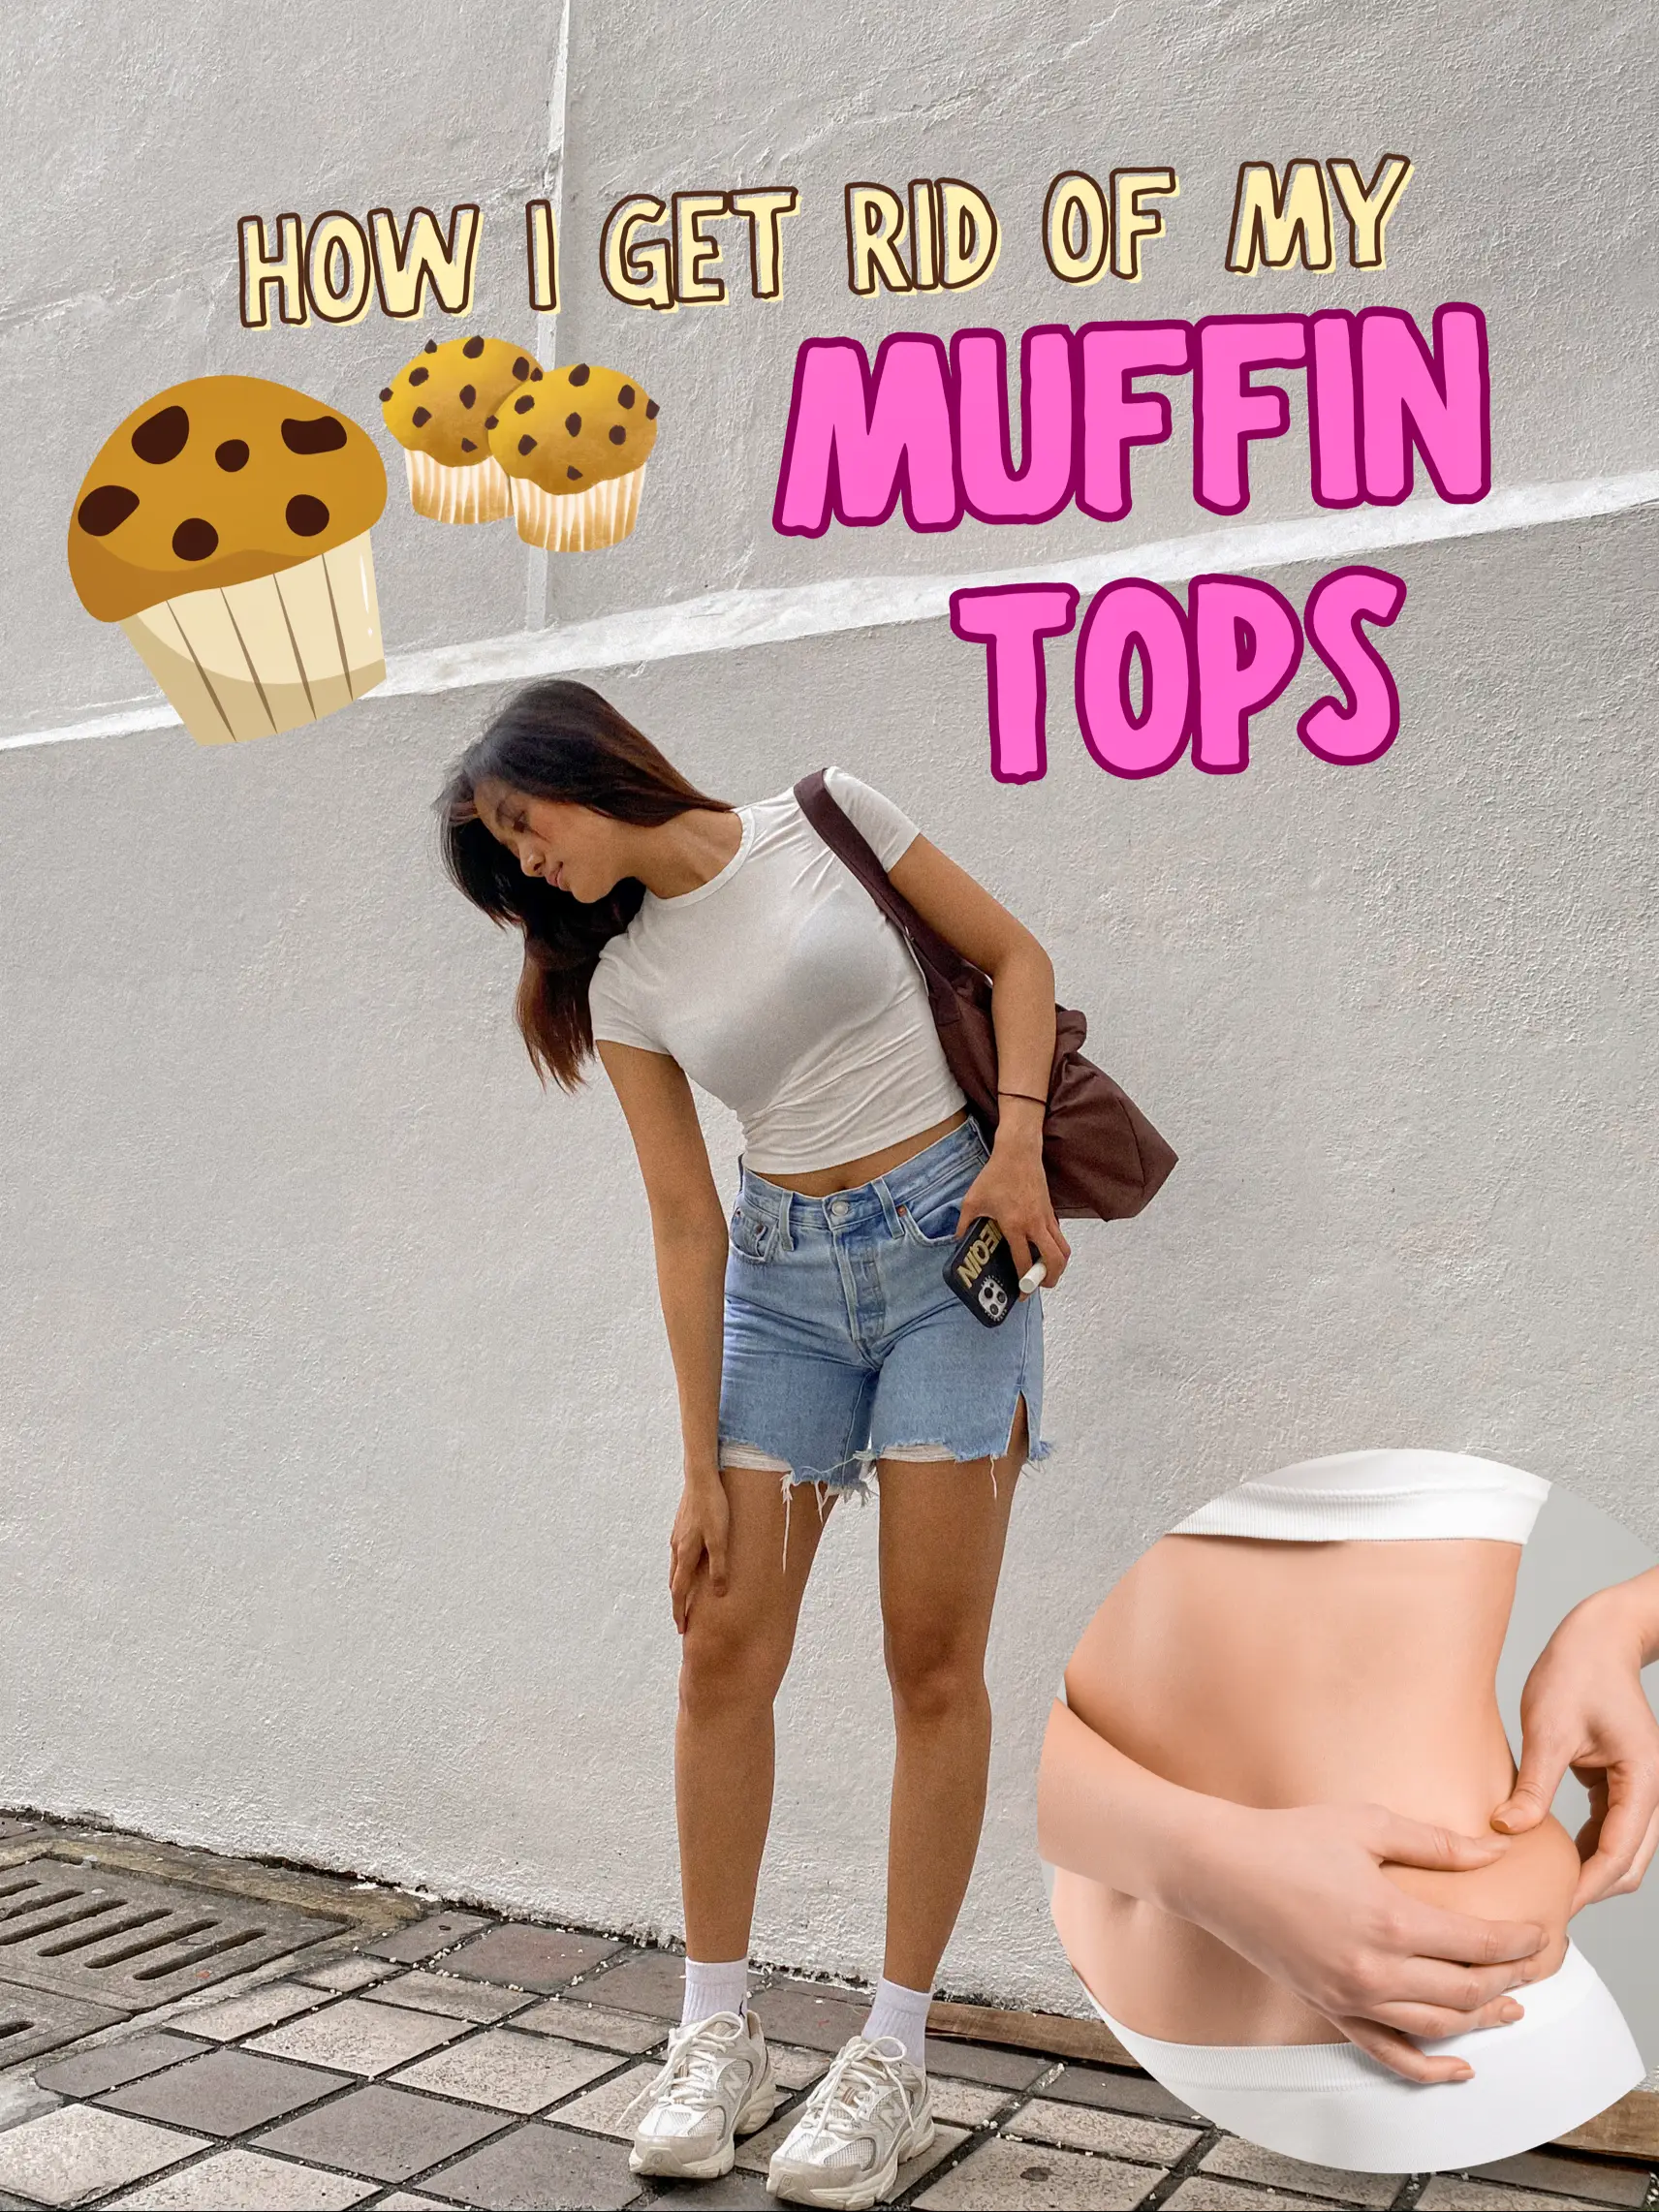 STRUGGLING WITH MUFFIN TOPS? DO THIS 4 EXERCISES 🤍, Video diterbitkan  oleh unnieqin